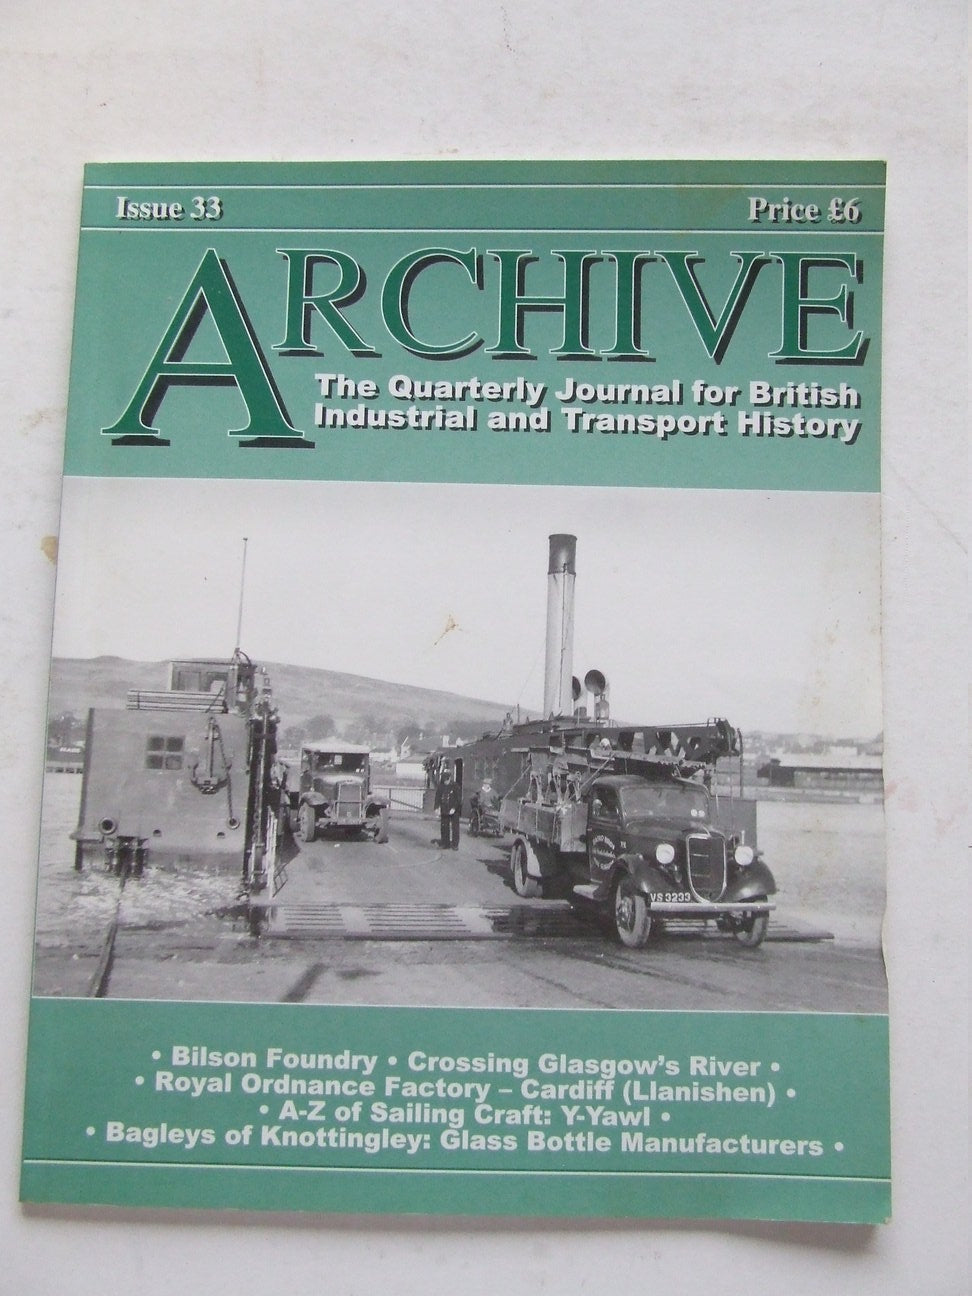 Archive, the quarterly journal for British industrial and transport history. issue 33